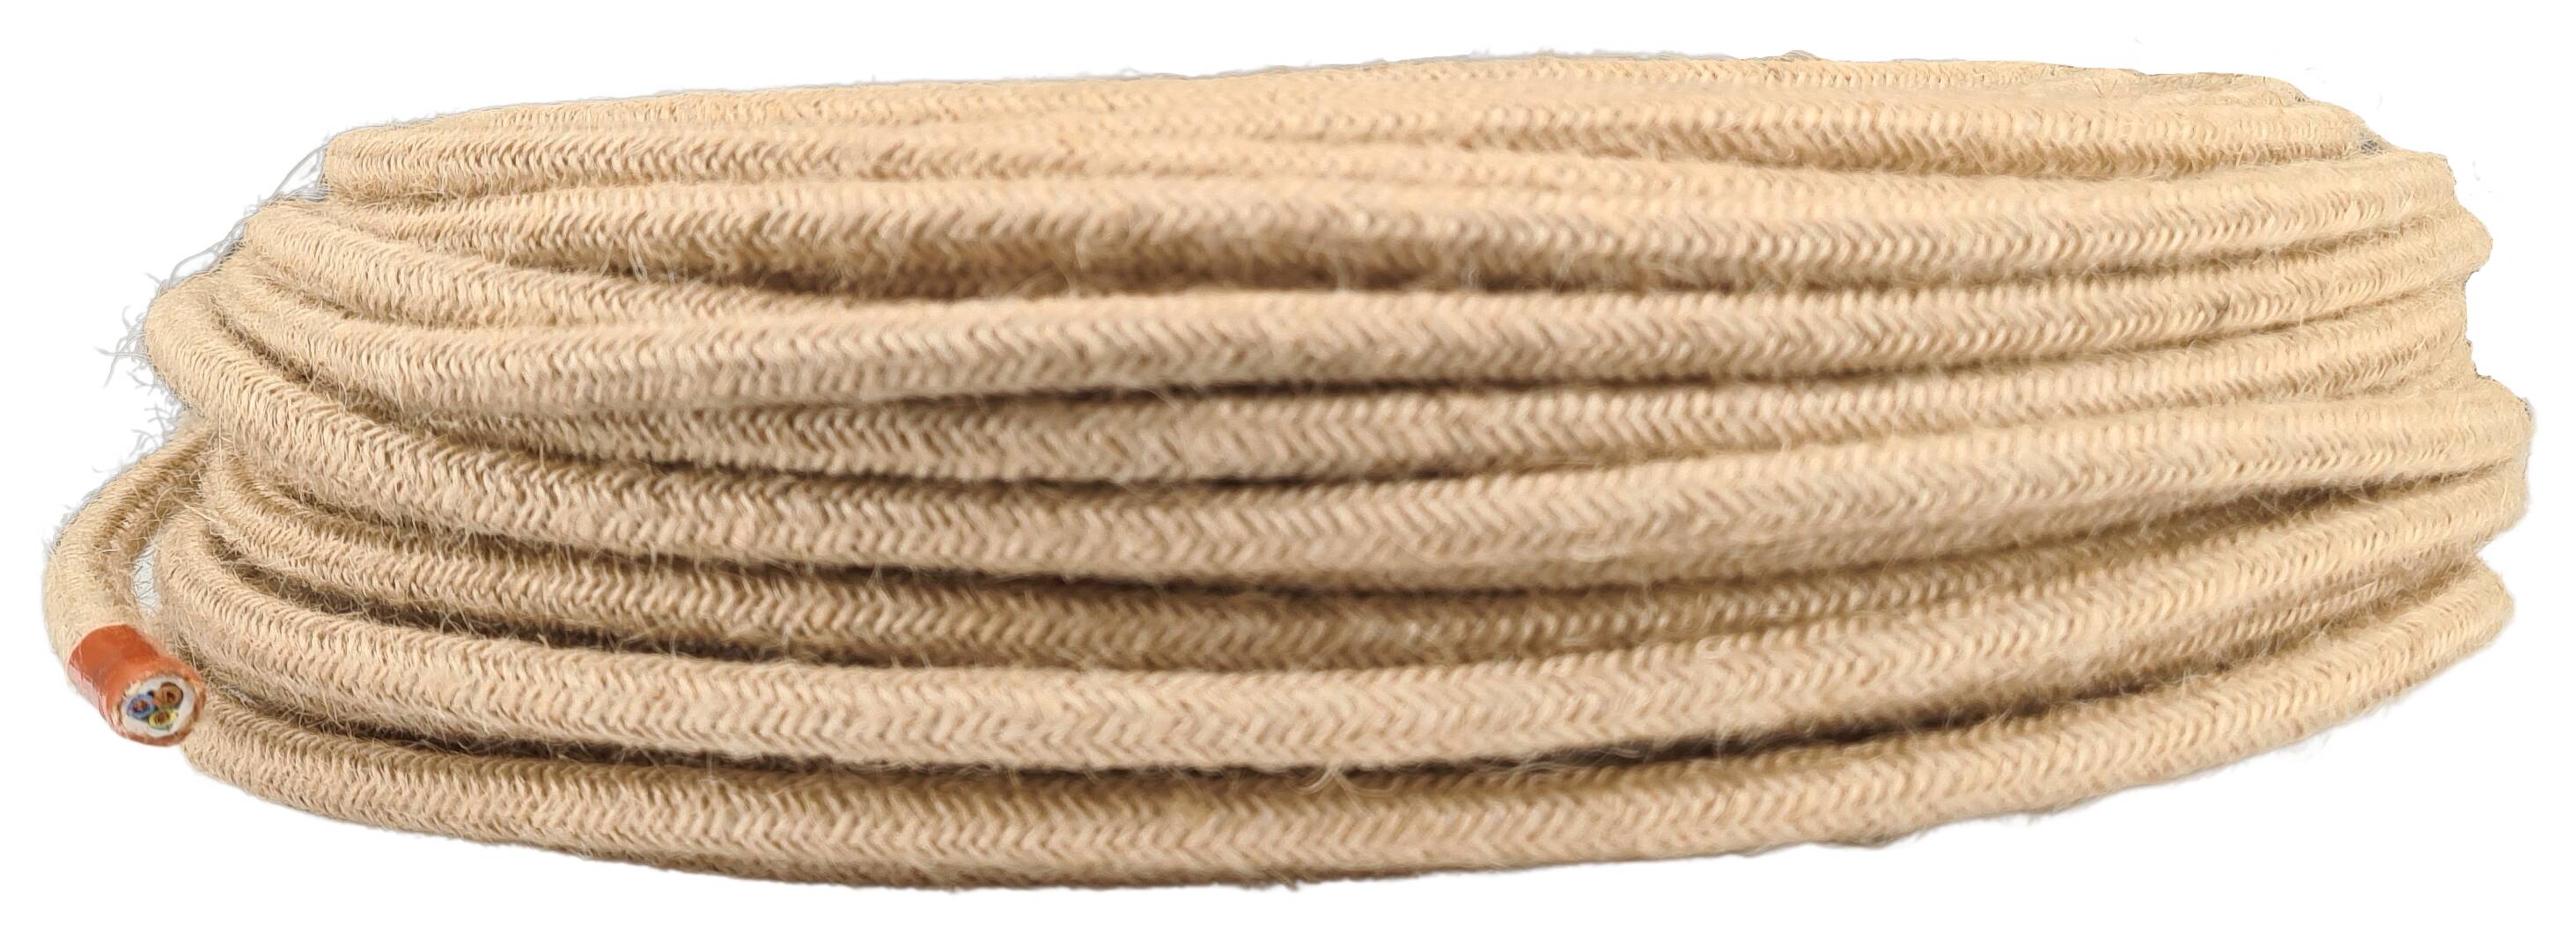 cable 3G 0,75 H03VV-F textile braided (Jute) flecked beige